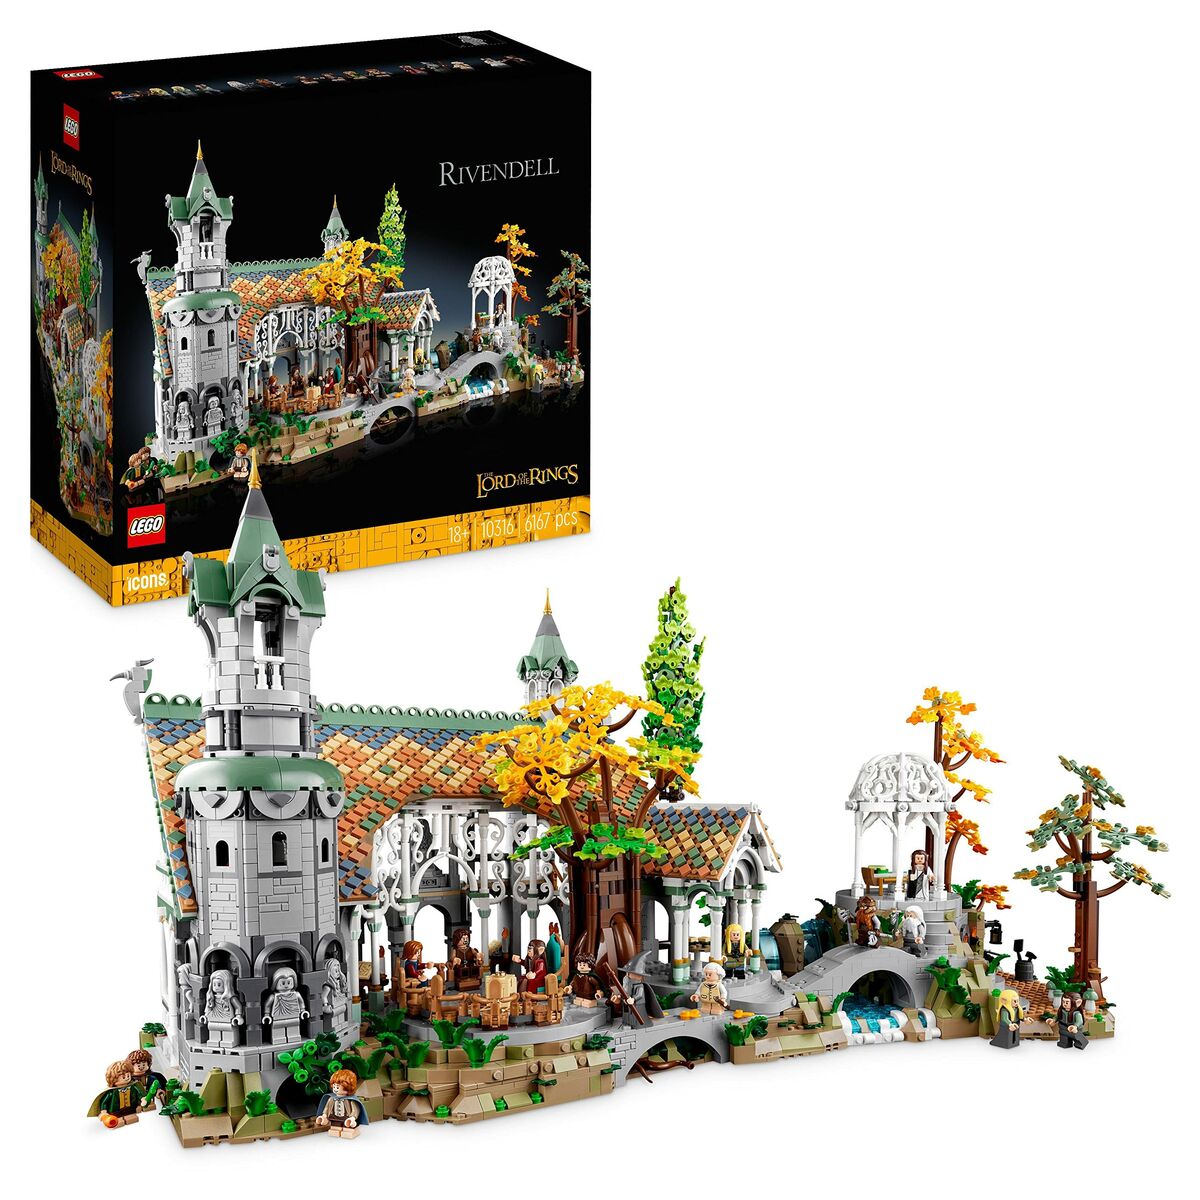 Playset Lego The Lord of the Rings: Rivendell 10316 6167 Pezzi 72 x 39 x 50 cm